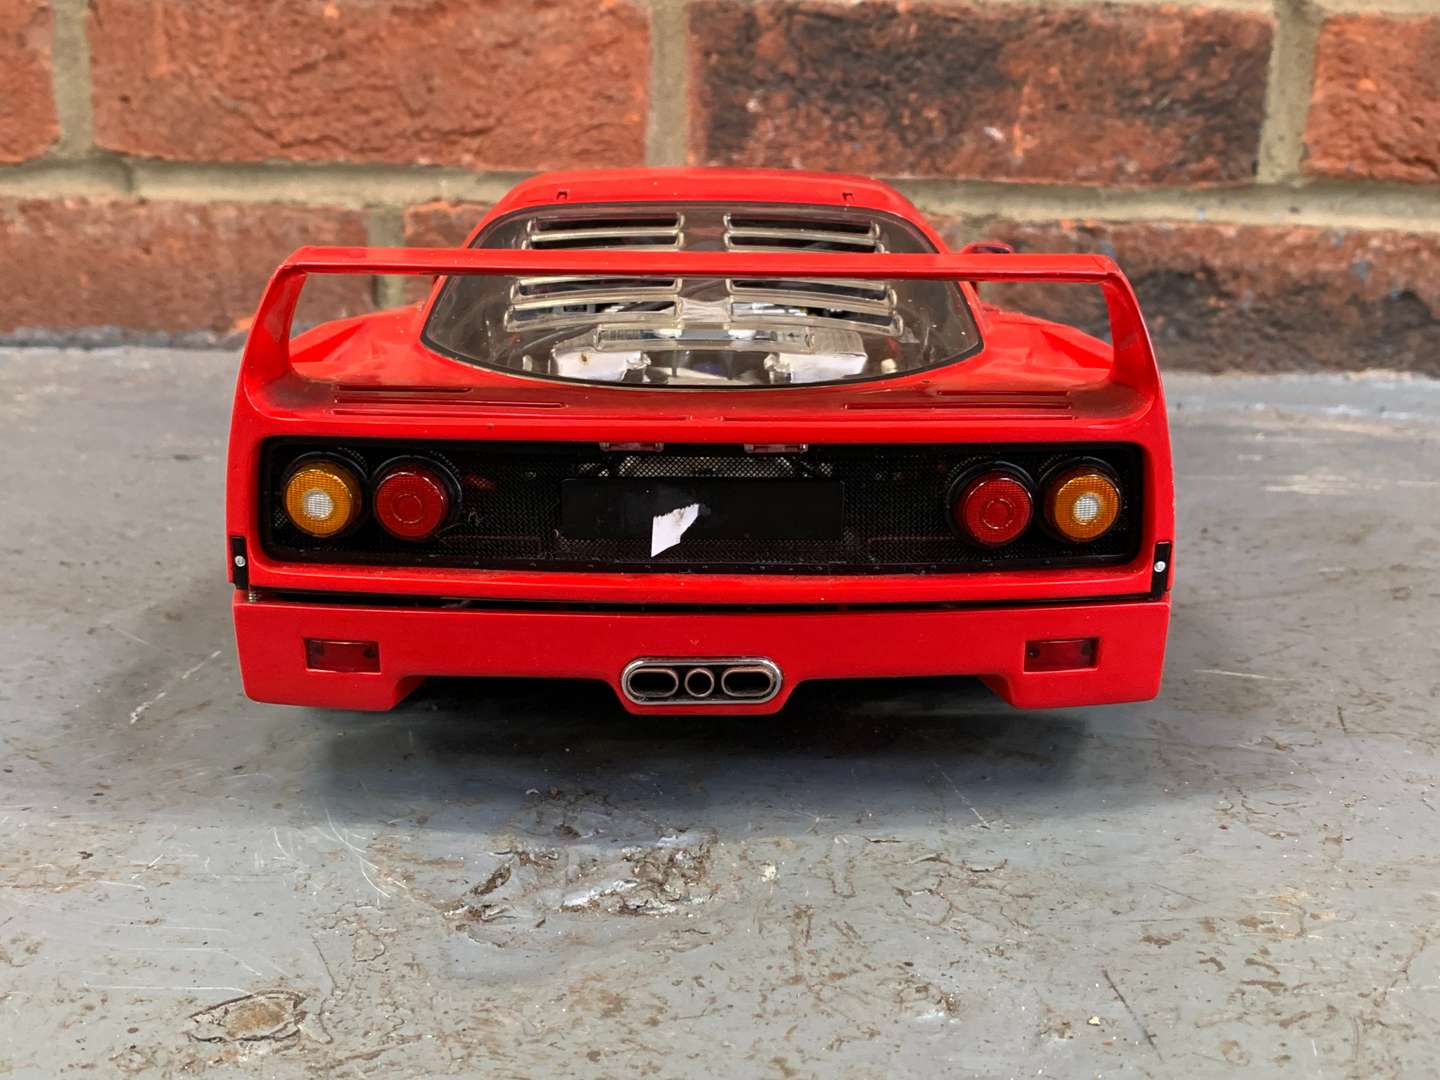 <p>Kyosho Die Cast F40 1:12 Scale Model</p>